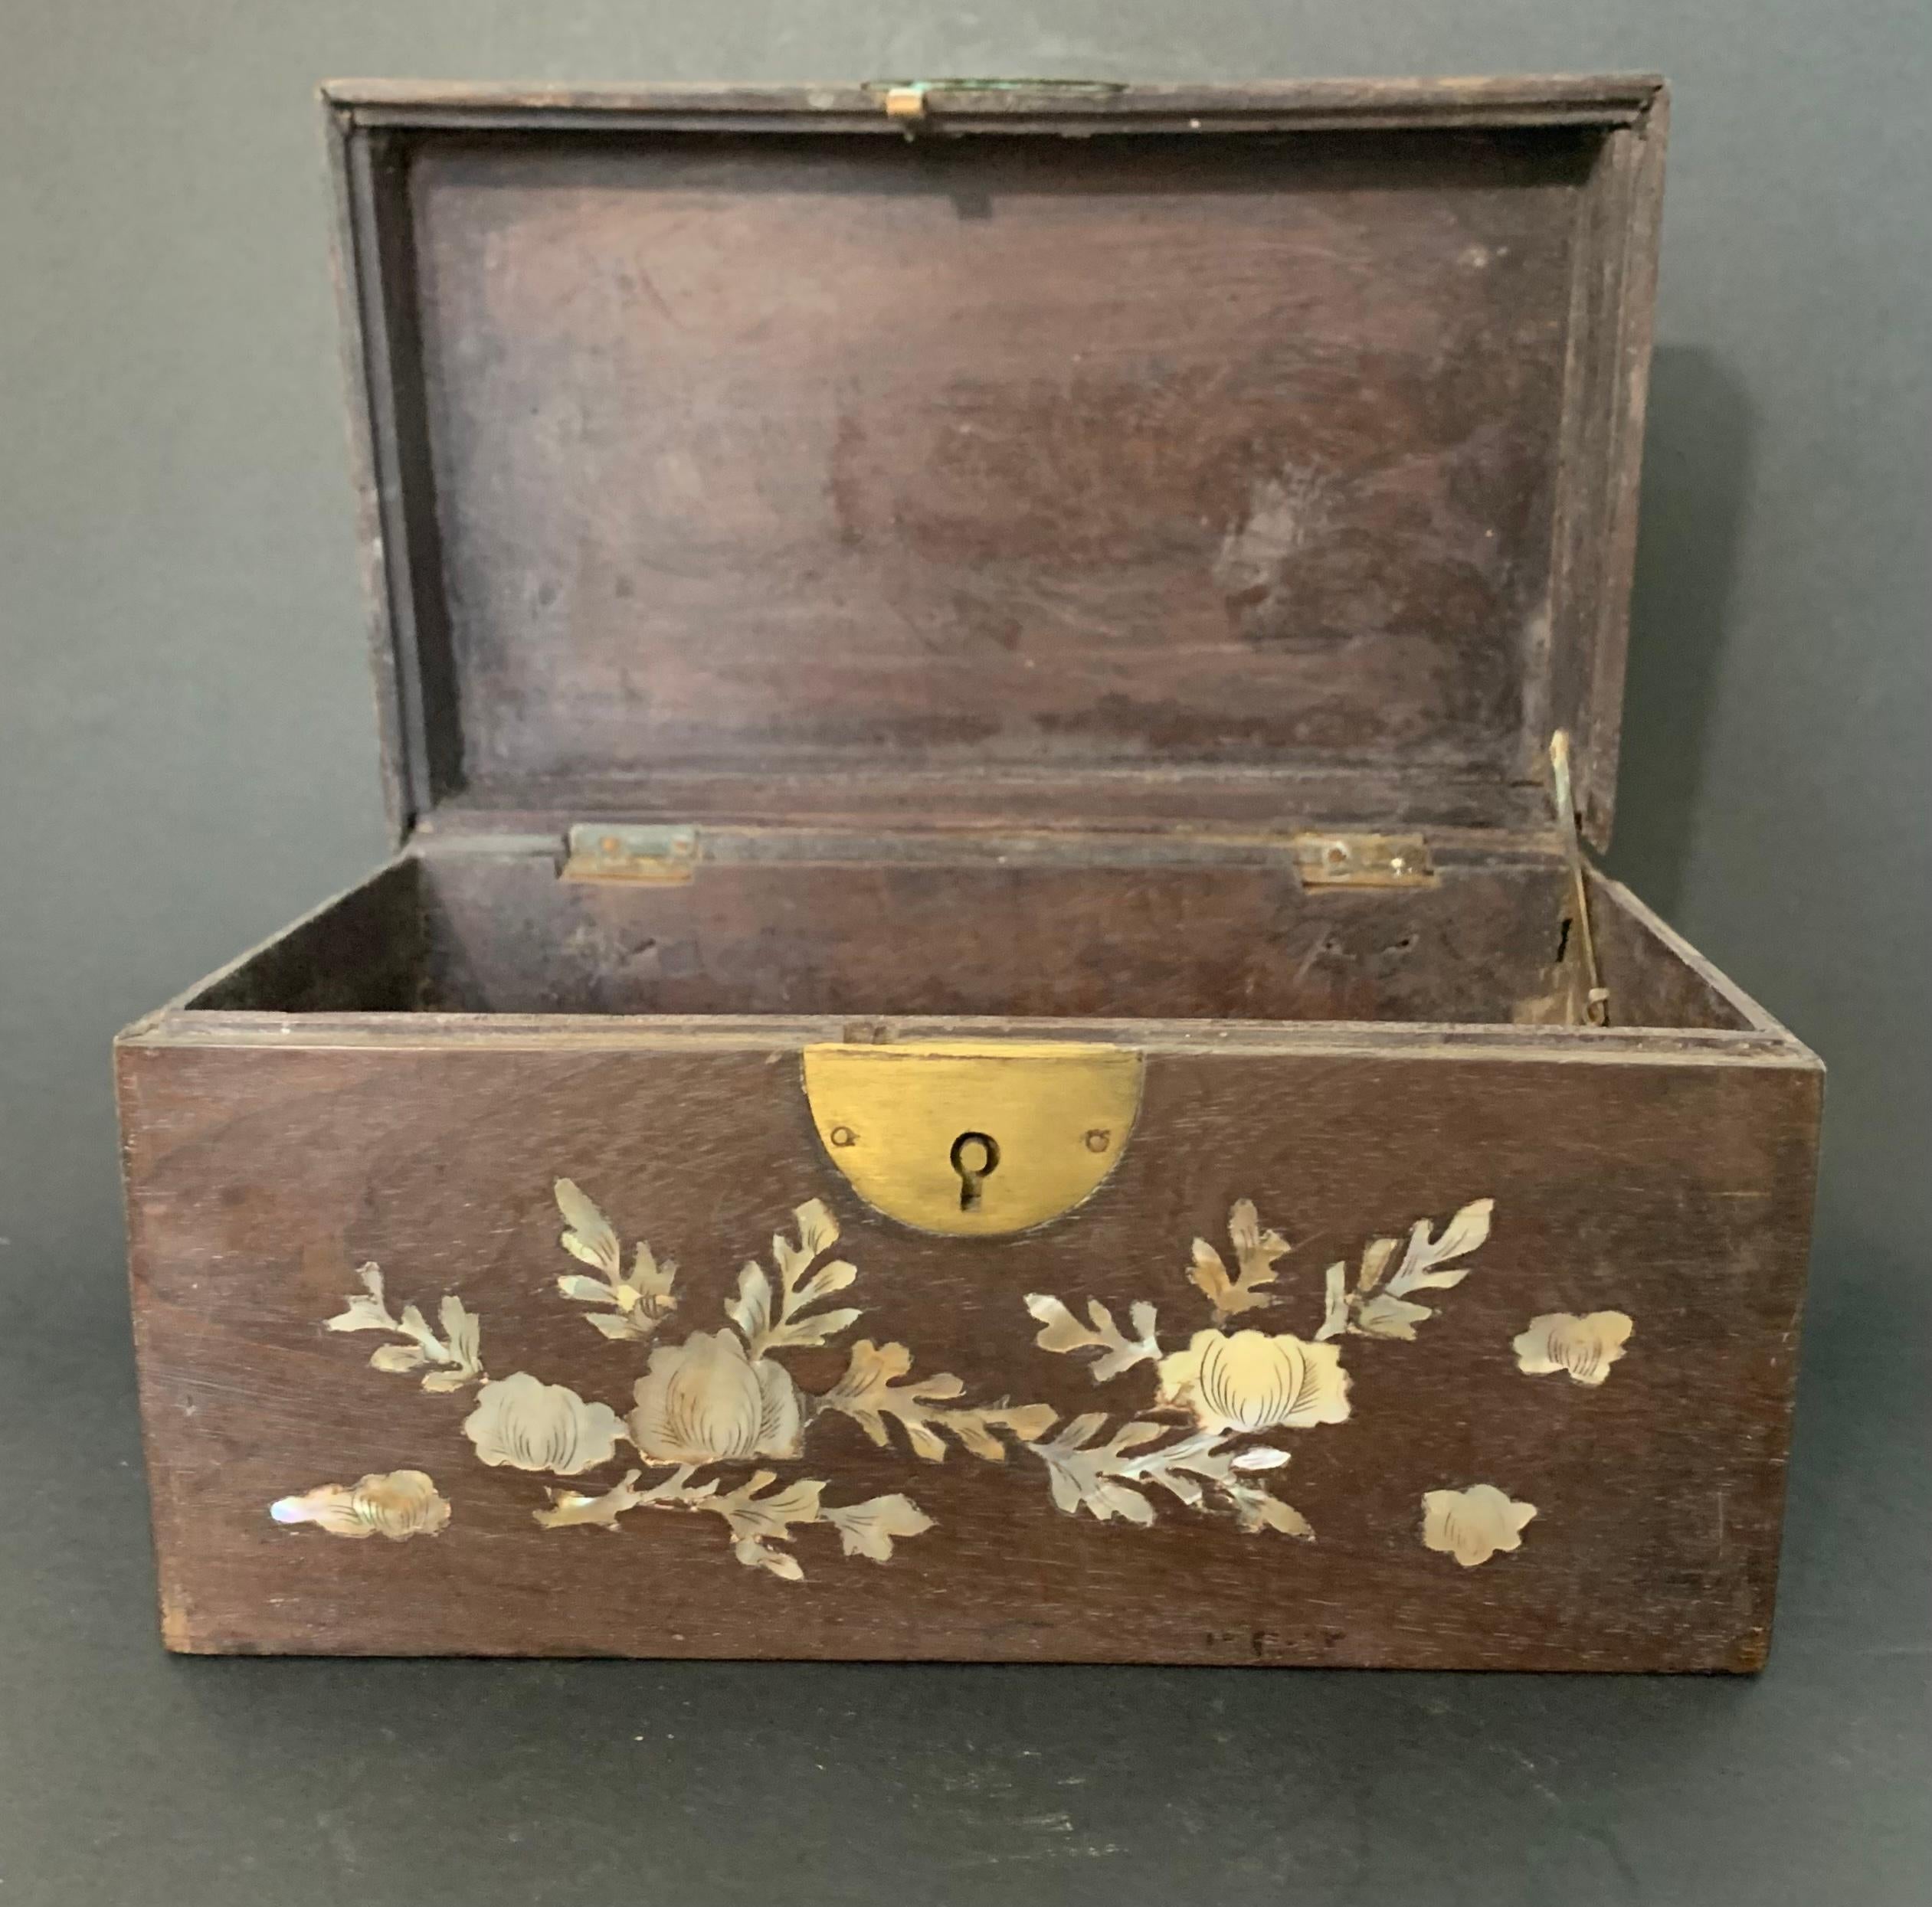 Nice wooden and mother-of-pearl box from the 1900s. The mother-of-pearl inlays form plant motifs (flowers and foliage), incised to give volume to the different parts. It closes with a round lock in the front, made of gilded metal. The wood is a